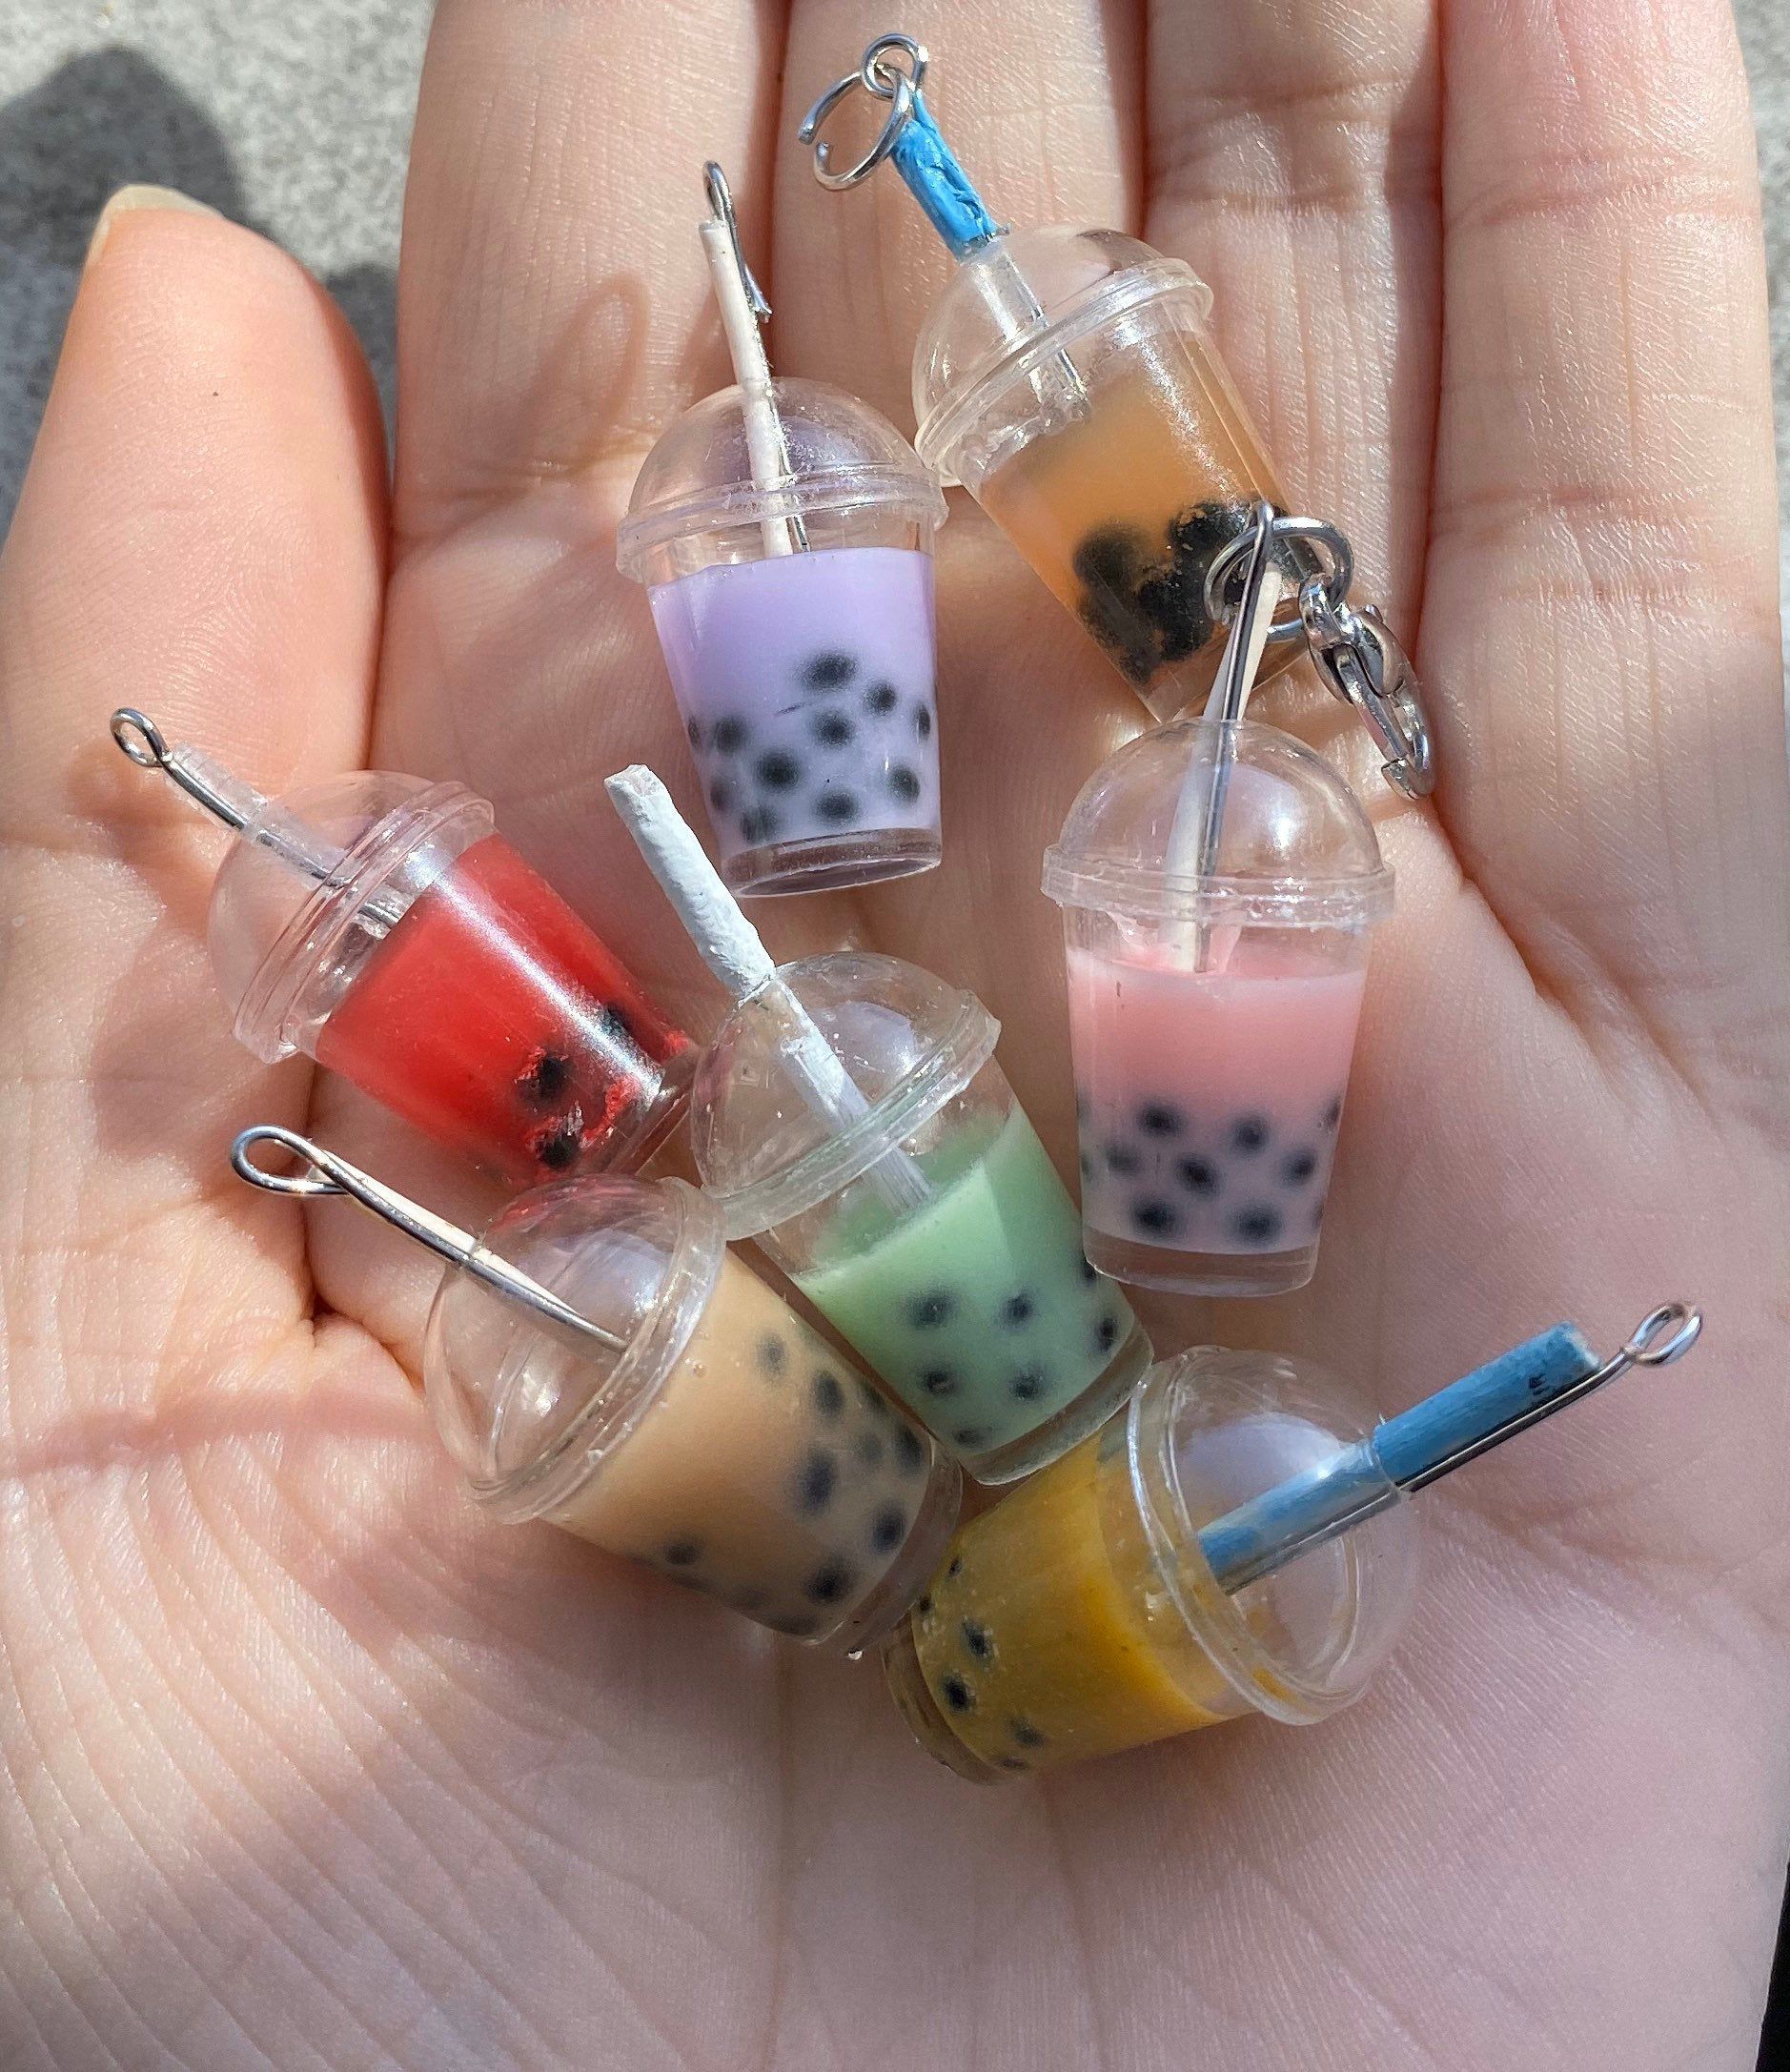 miniature boba keychains in a hand